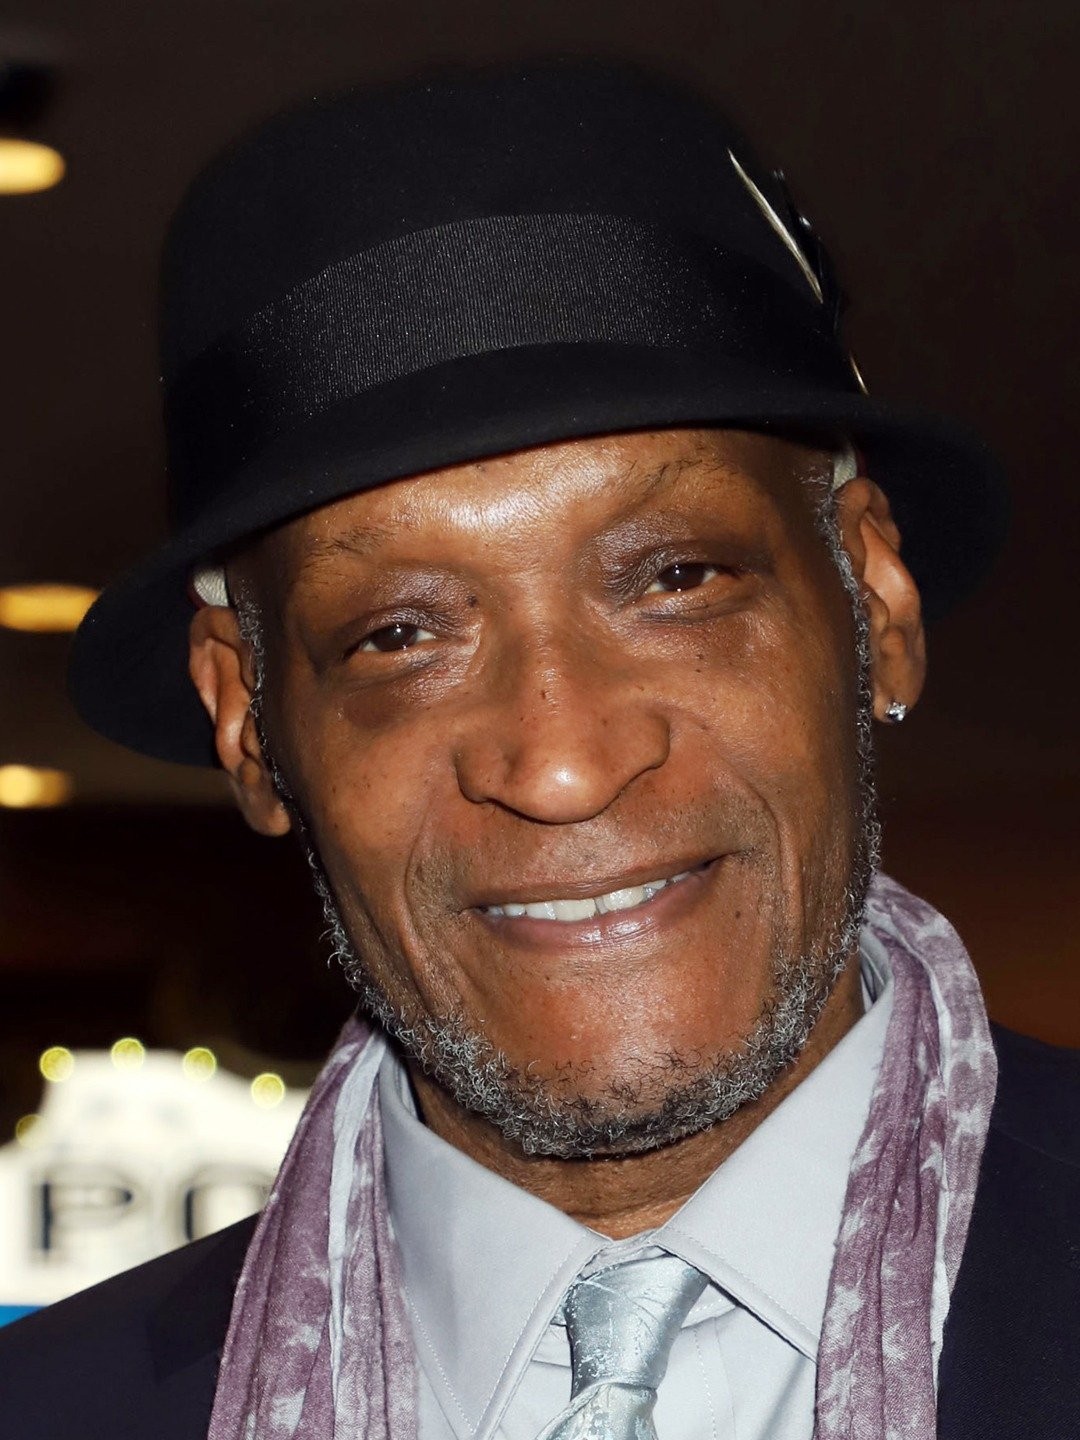 Greatest horror movie icon of all time: Robert Englund or Tony Todd?